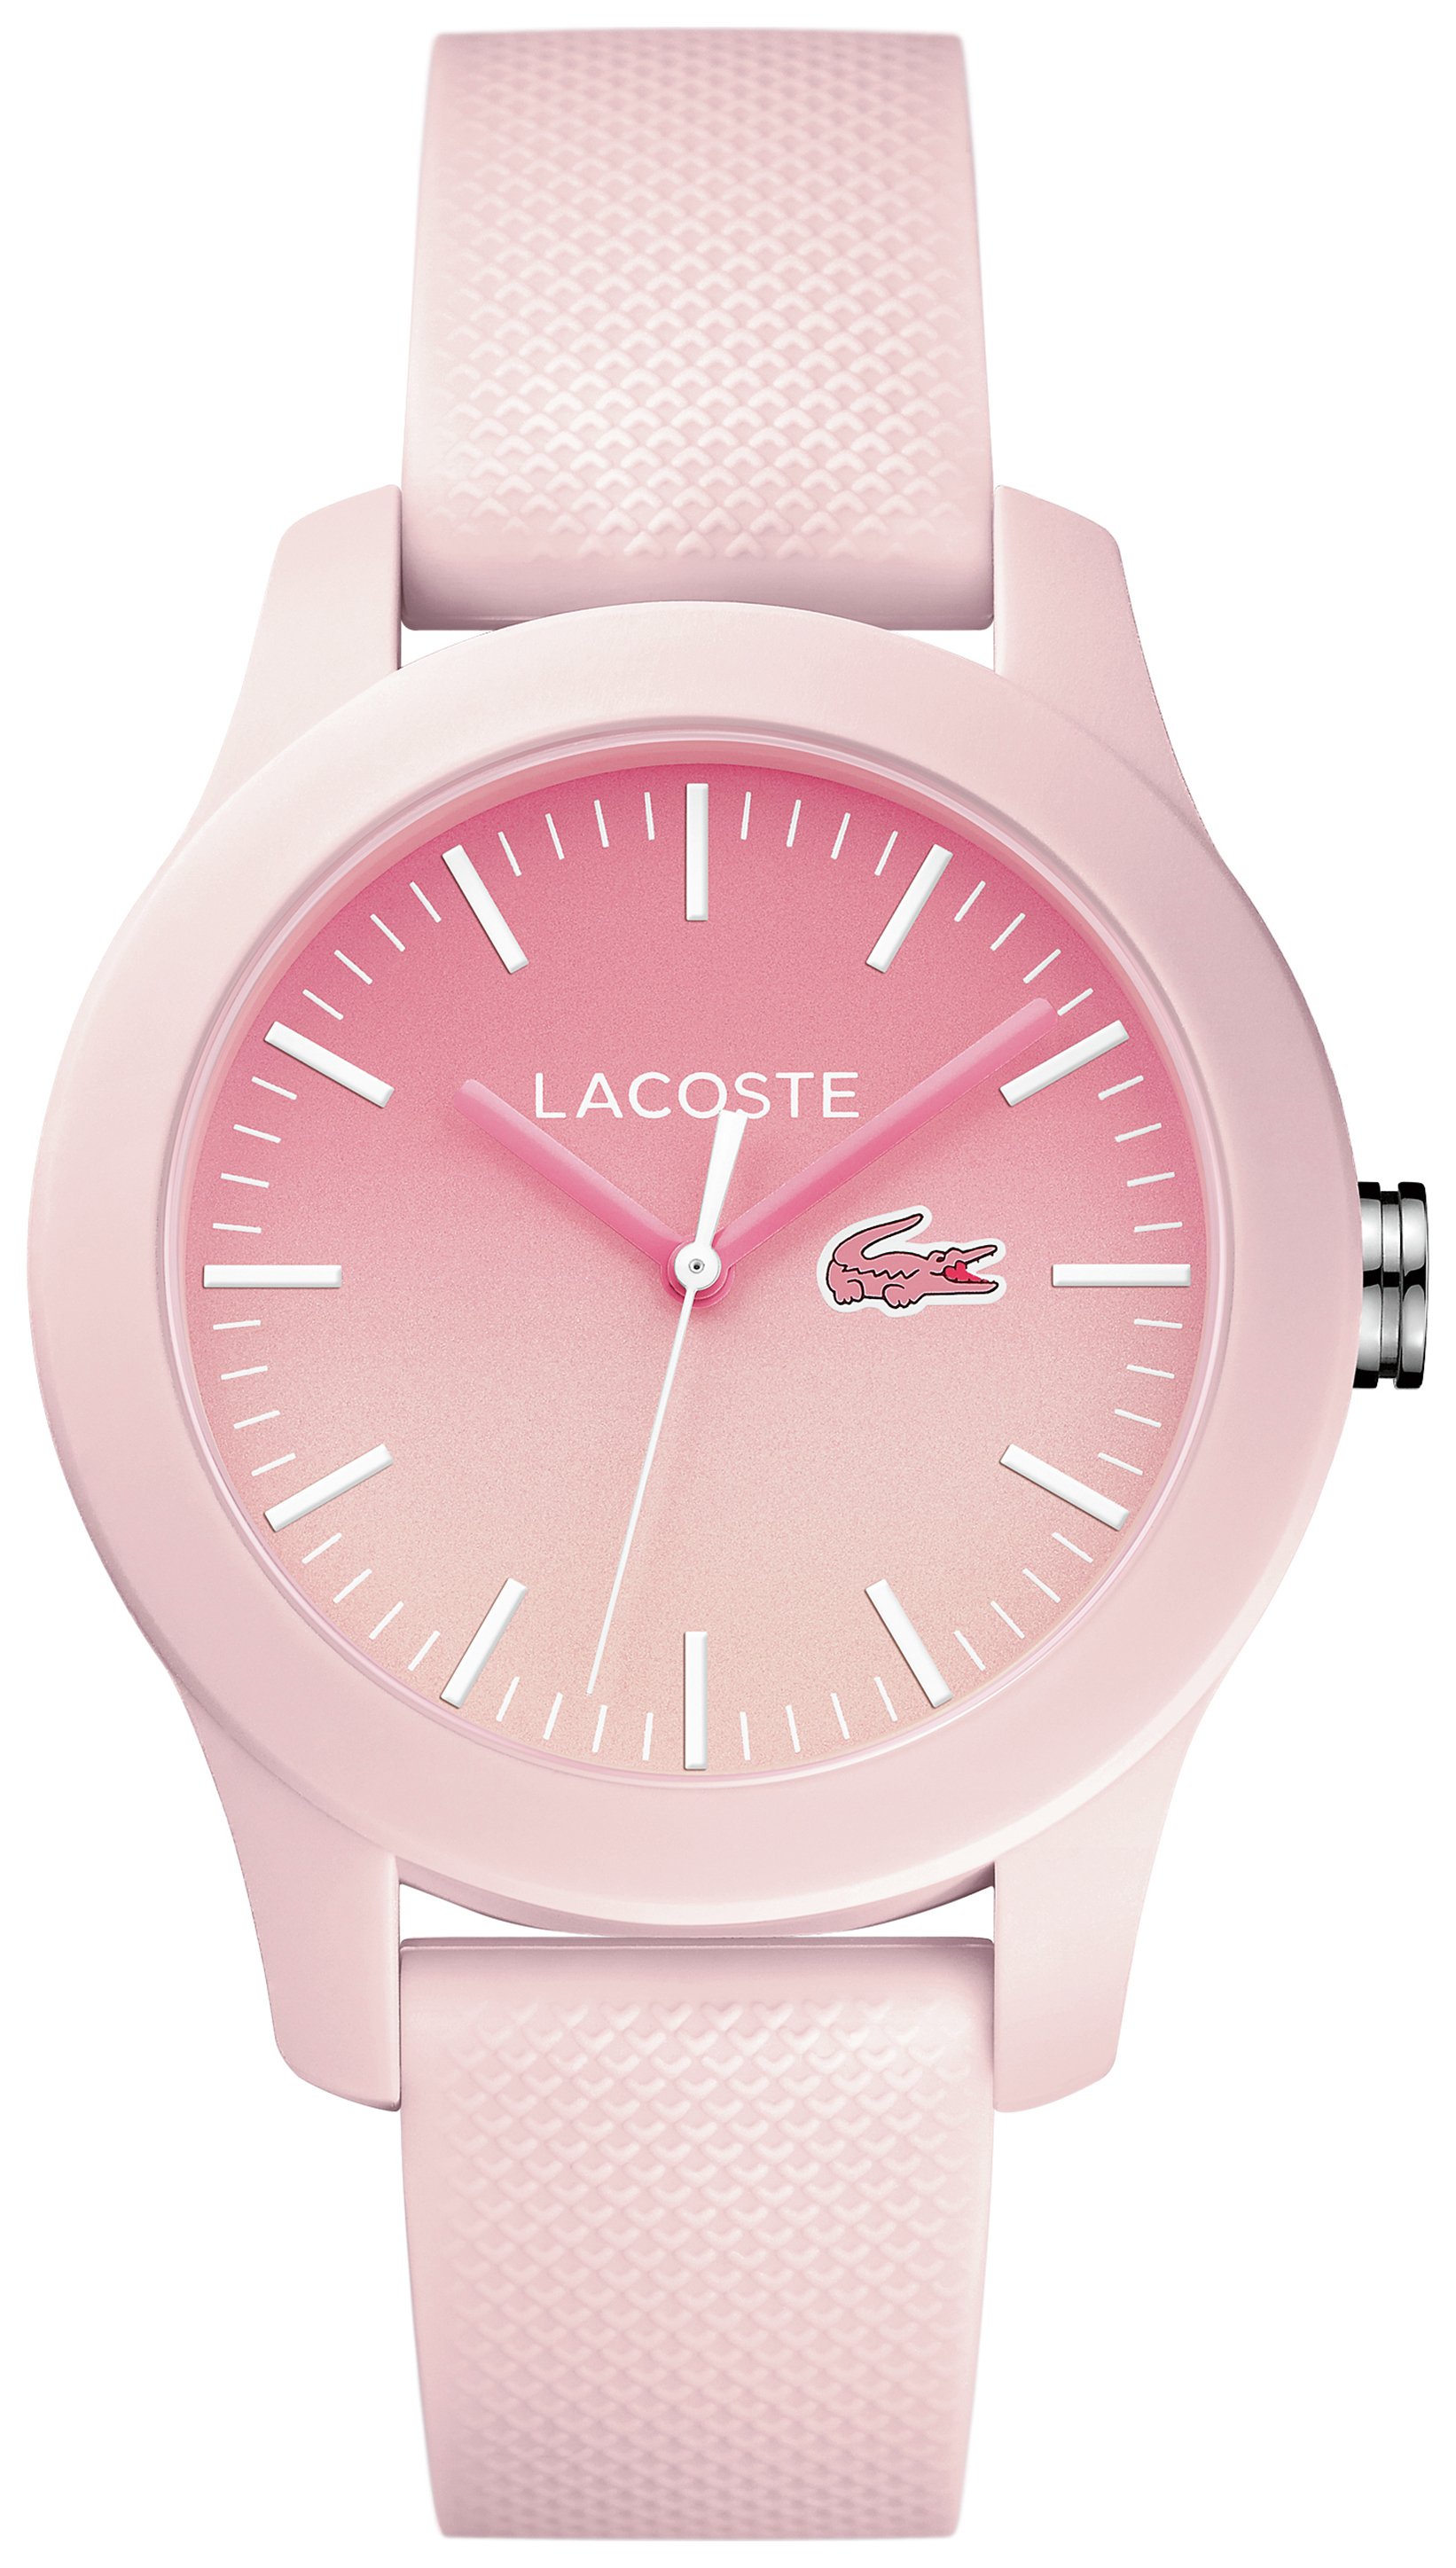 Lacoste Ladies' 12.12 Pink Silicone Strap Watch